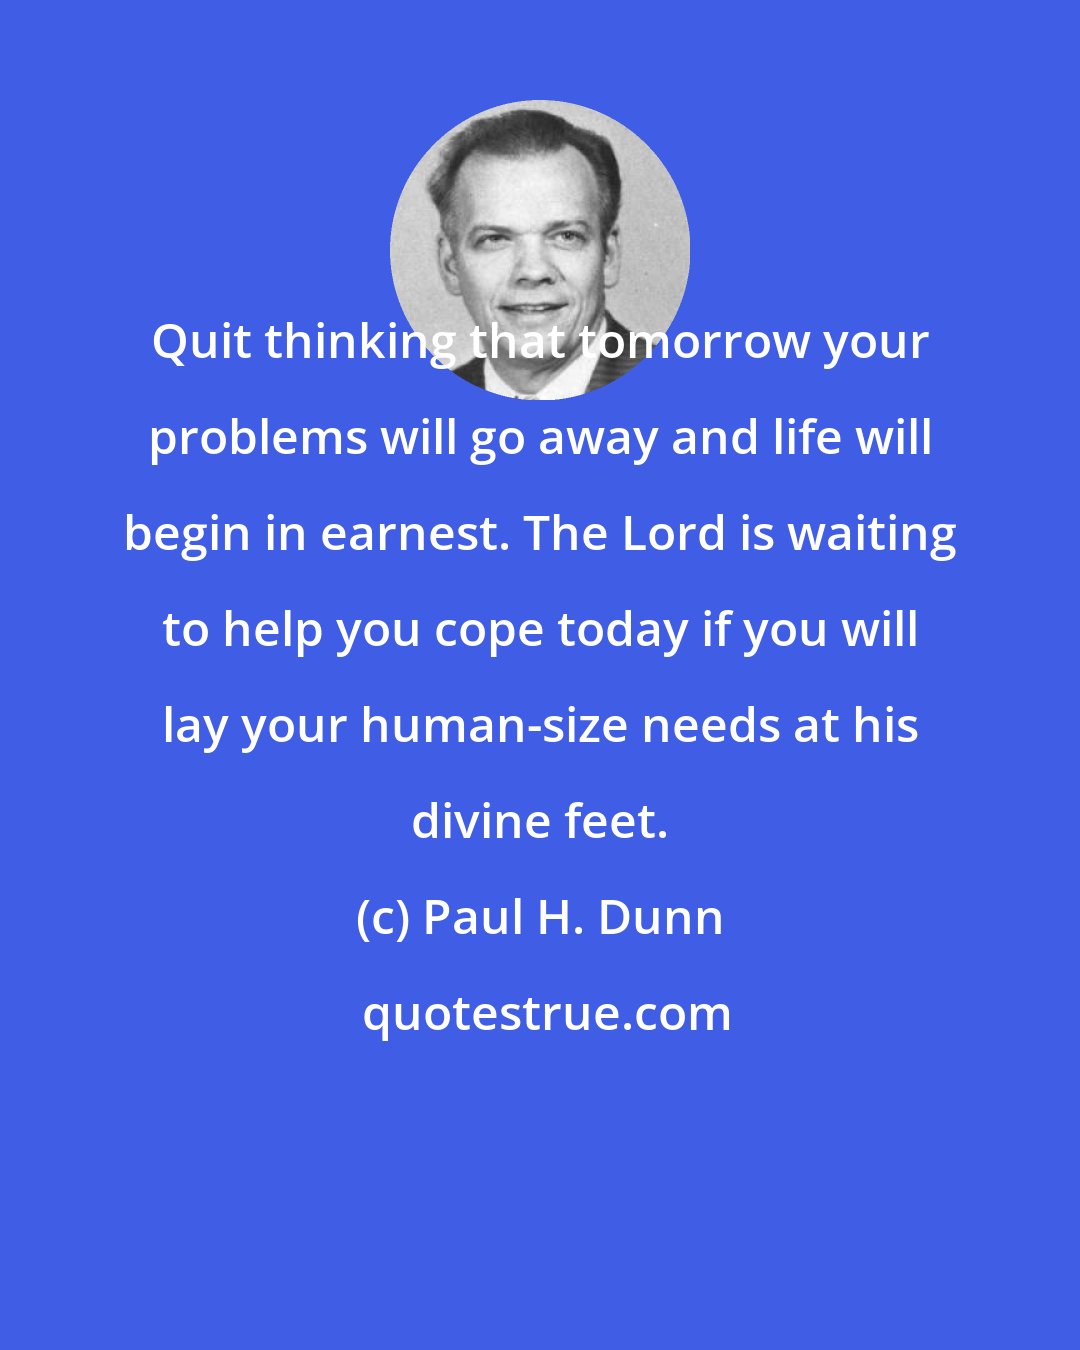 Paul H. Dunn: Quit thinking that tomorrow your problems will go away and life will begin in earnest. The Lord is waiting to help you cope today if you will lay your human-size needs at his divine feet.